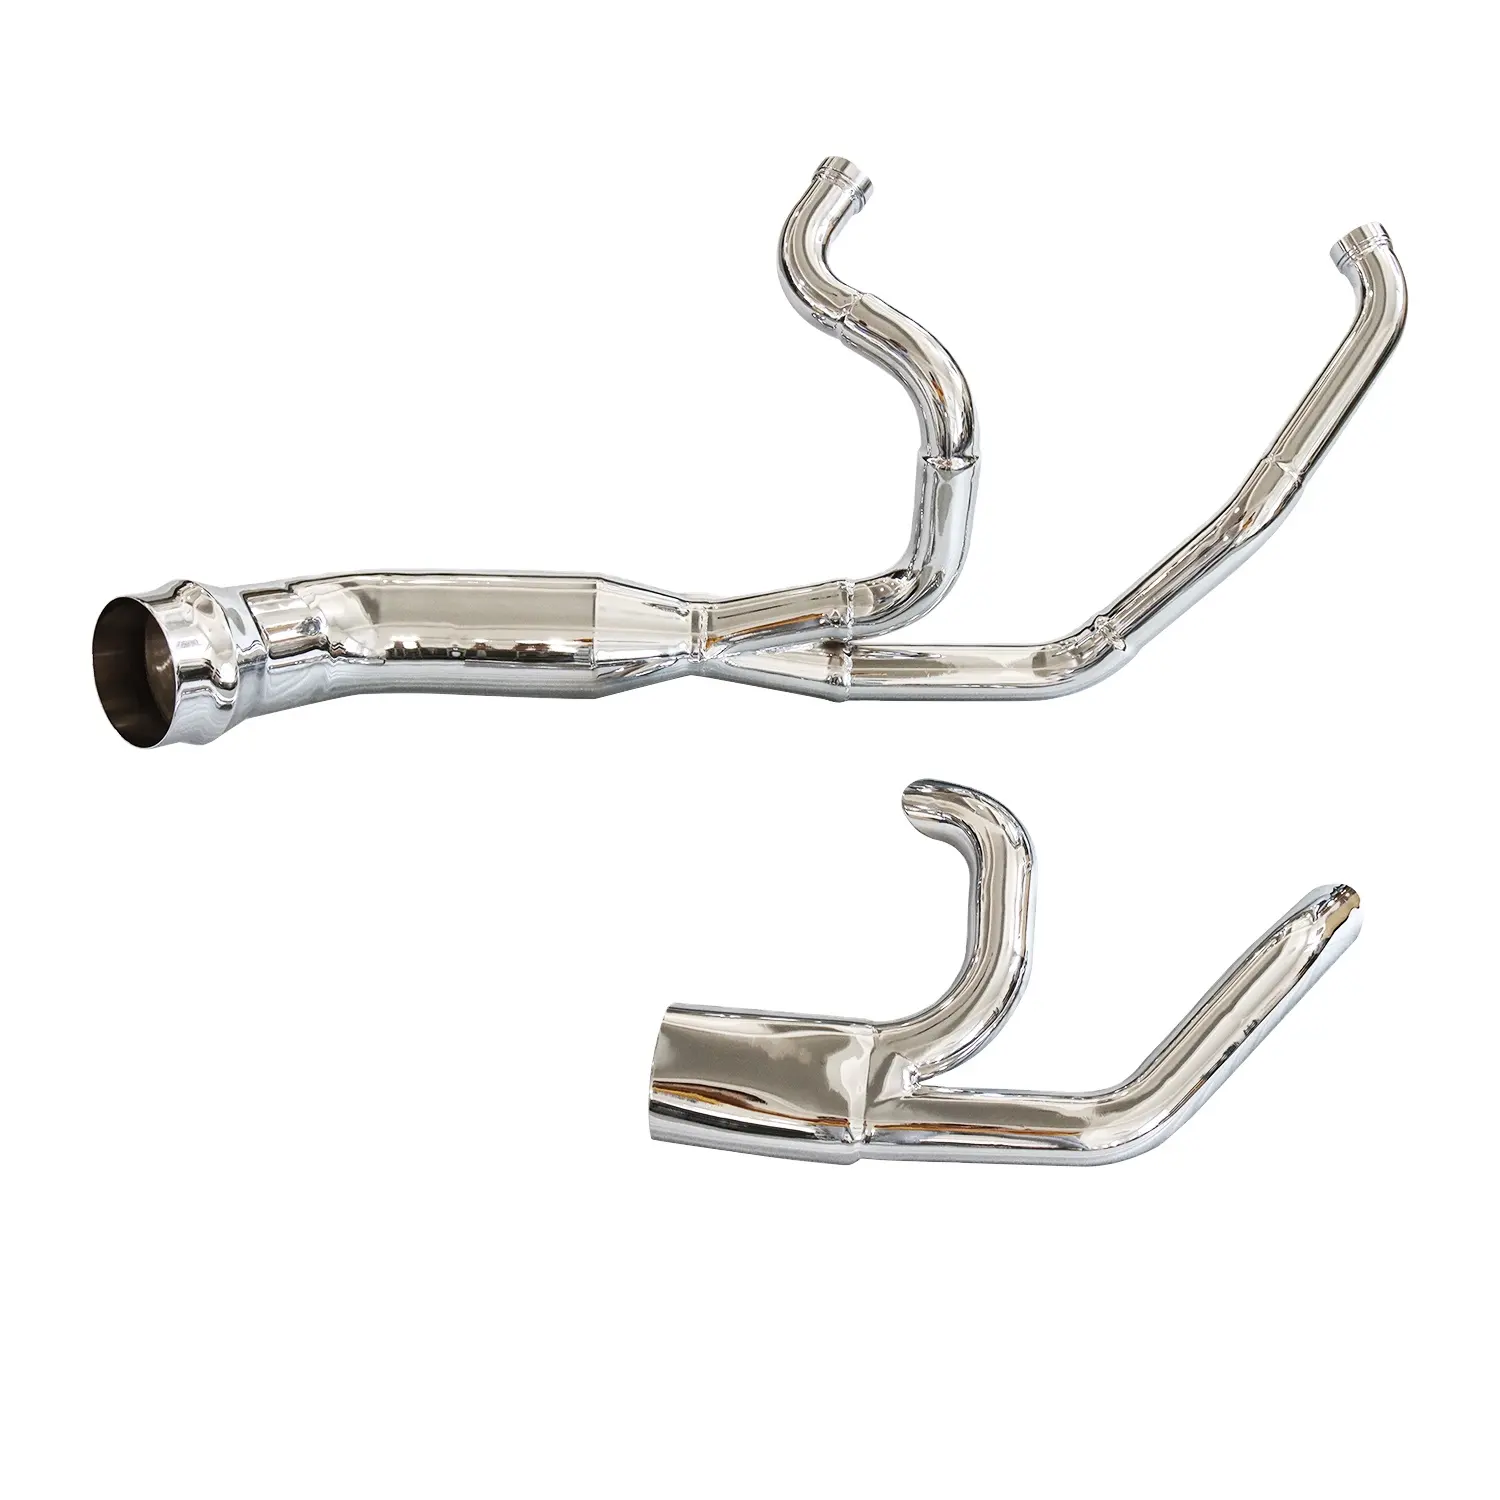 Custom 2 into 1 Exhaust System 1995-2016 For Motorcycle Harley-Davidson